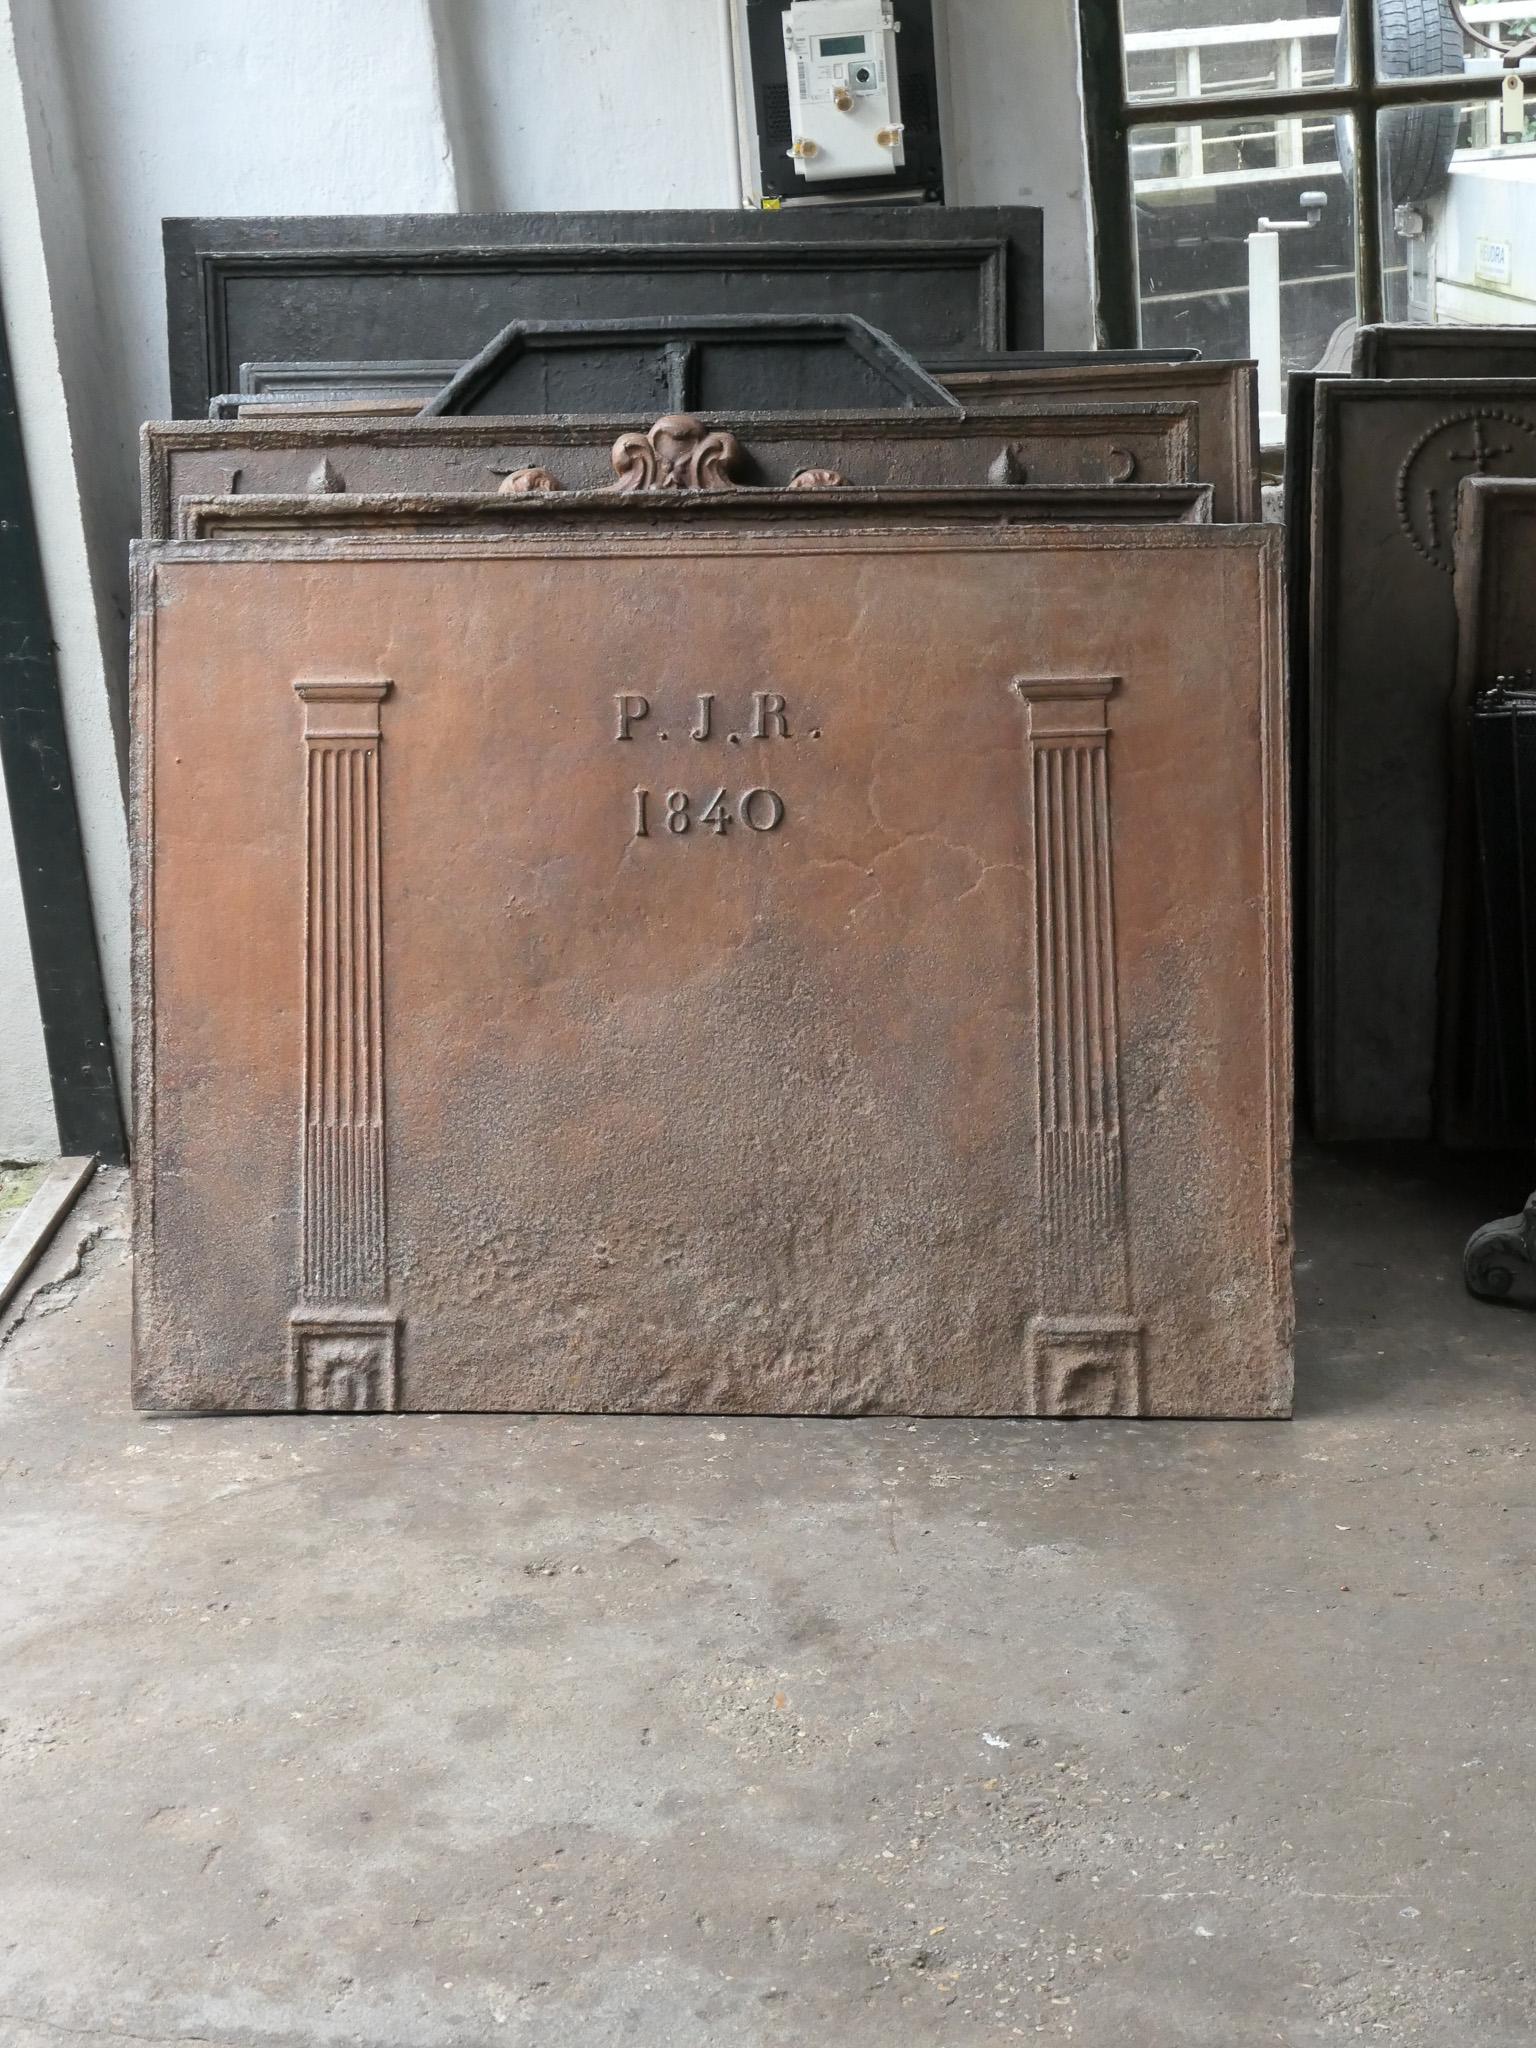 19th century French neoclassical period fireback. The pillars symbolize freedom, one of the three values of the French Revolution. The date of production, 1840, is also cast in the fireback.

The fireback is made of cast iron and has a brown patina.